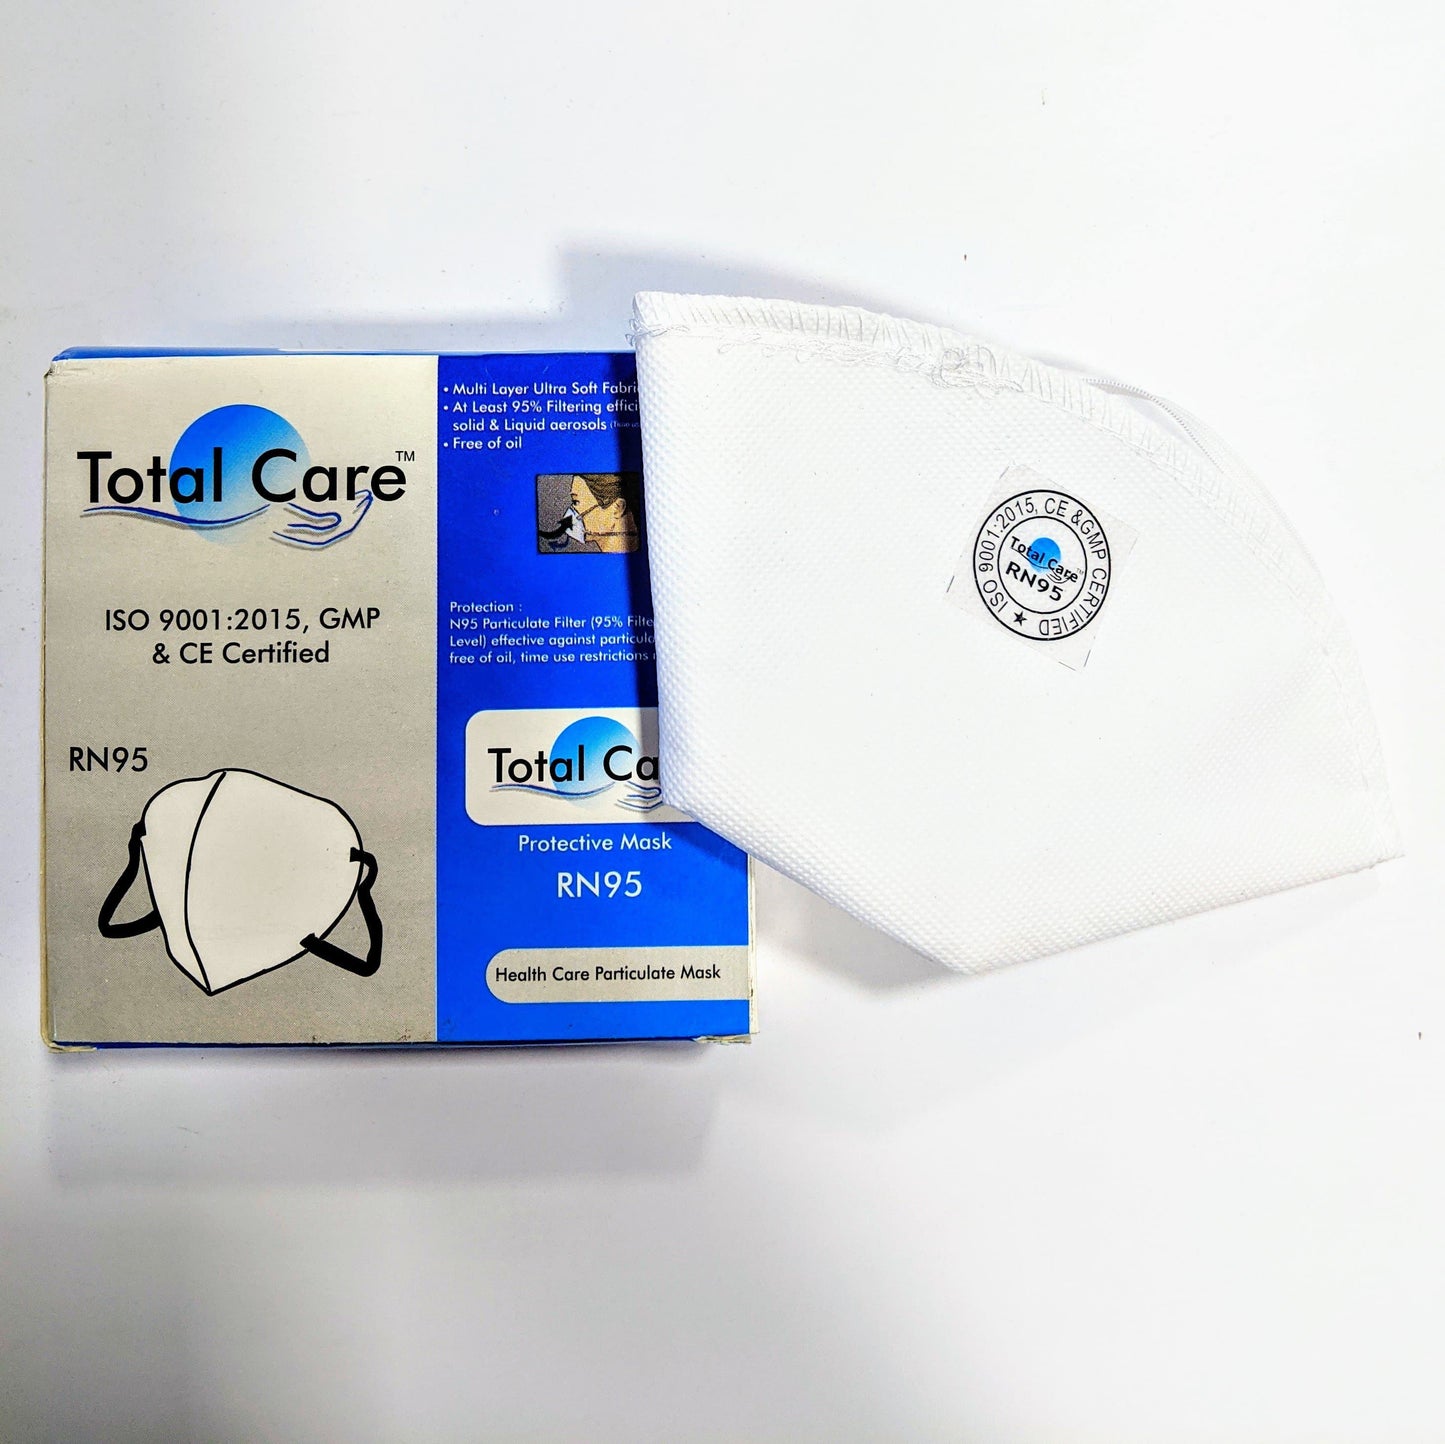 Total Care Protective Mask RN95